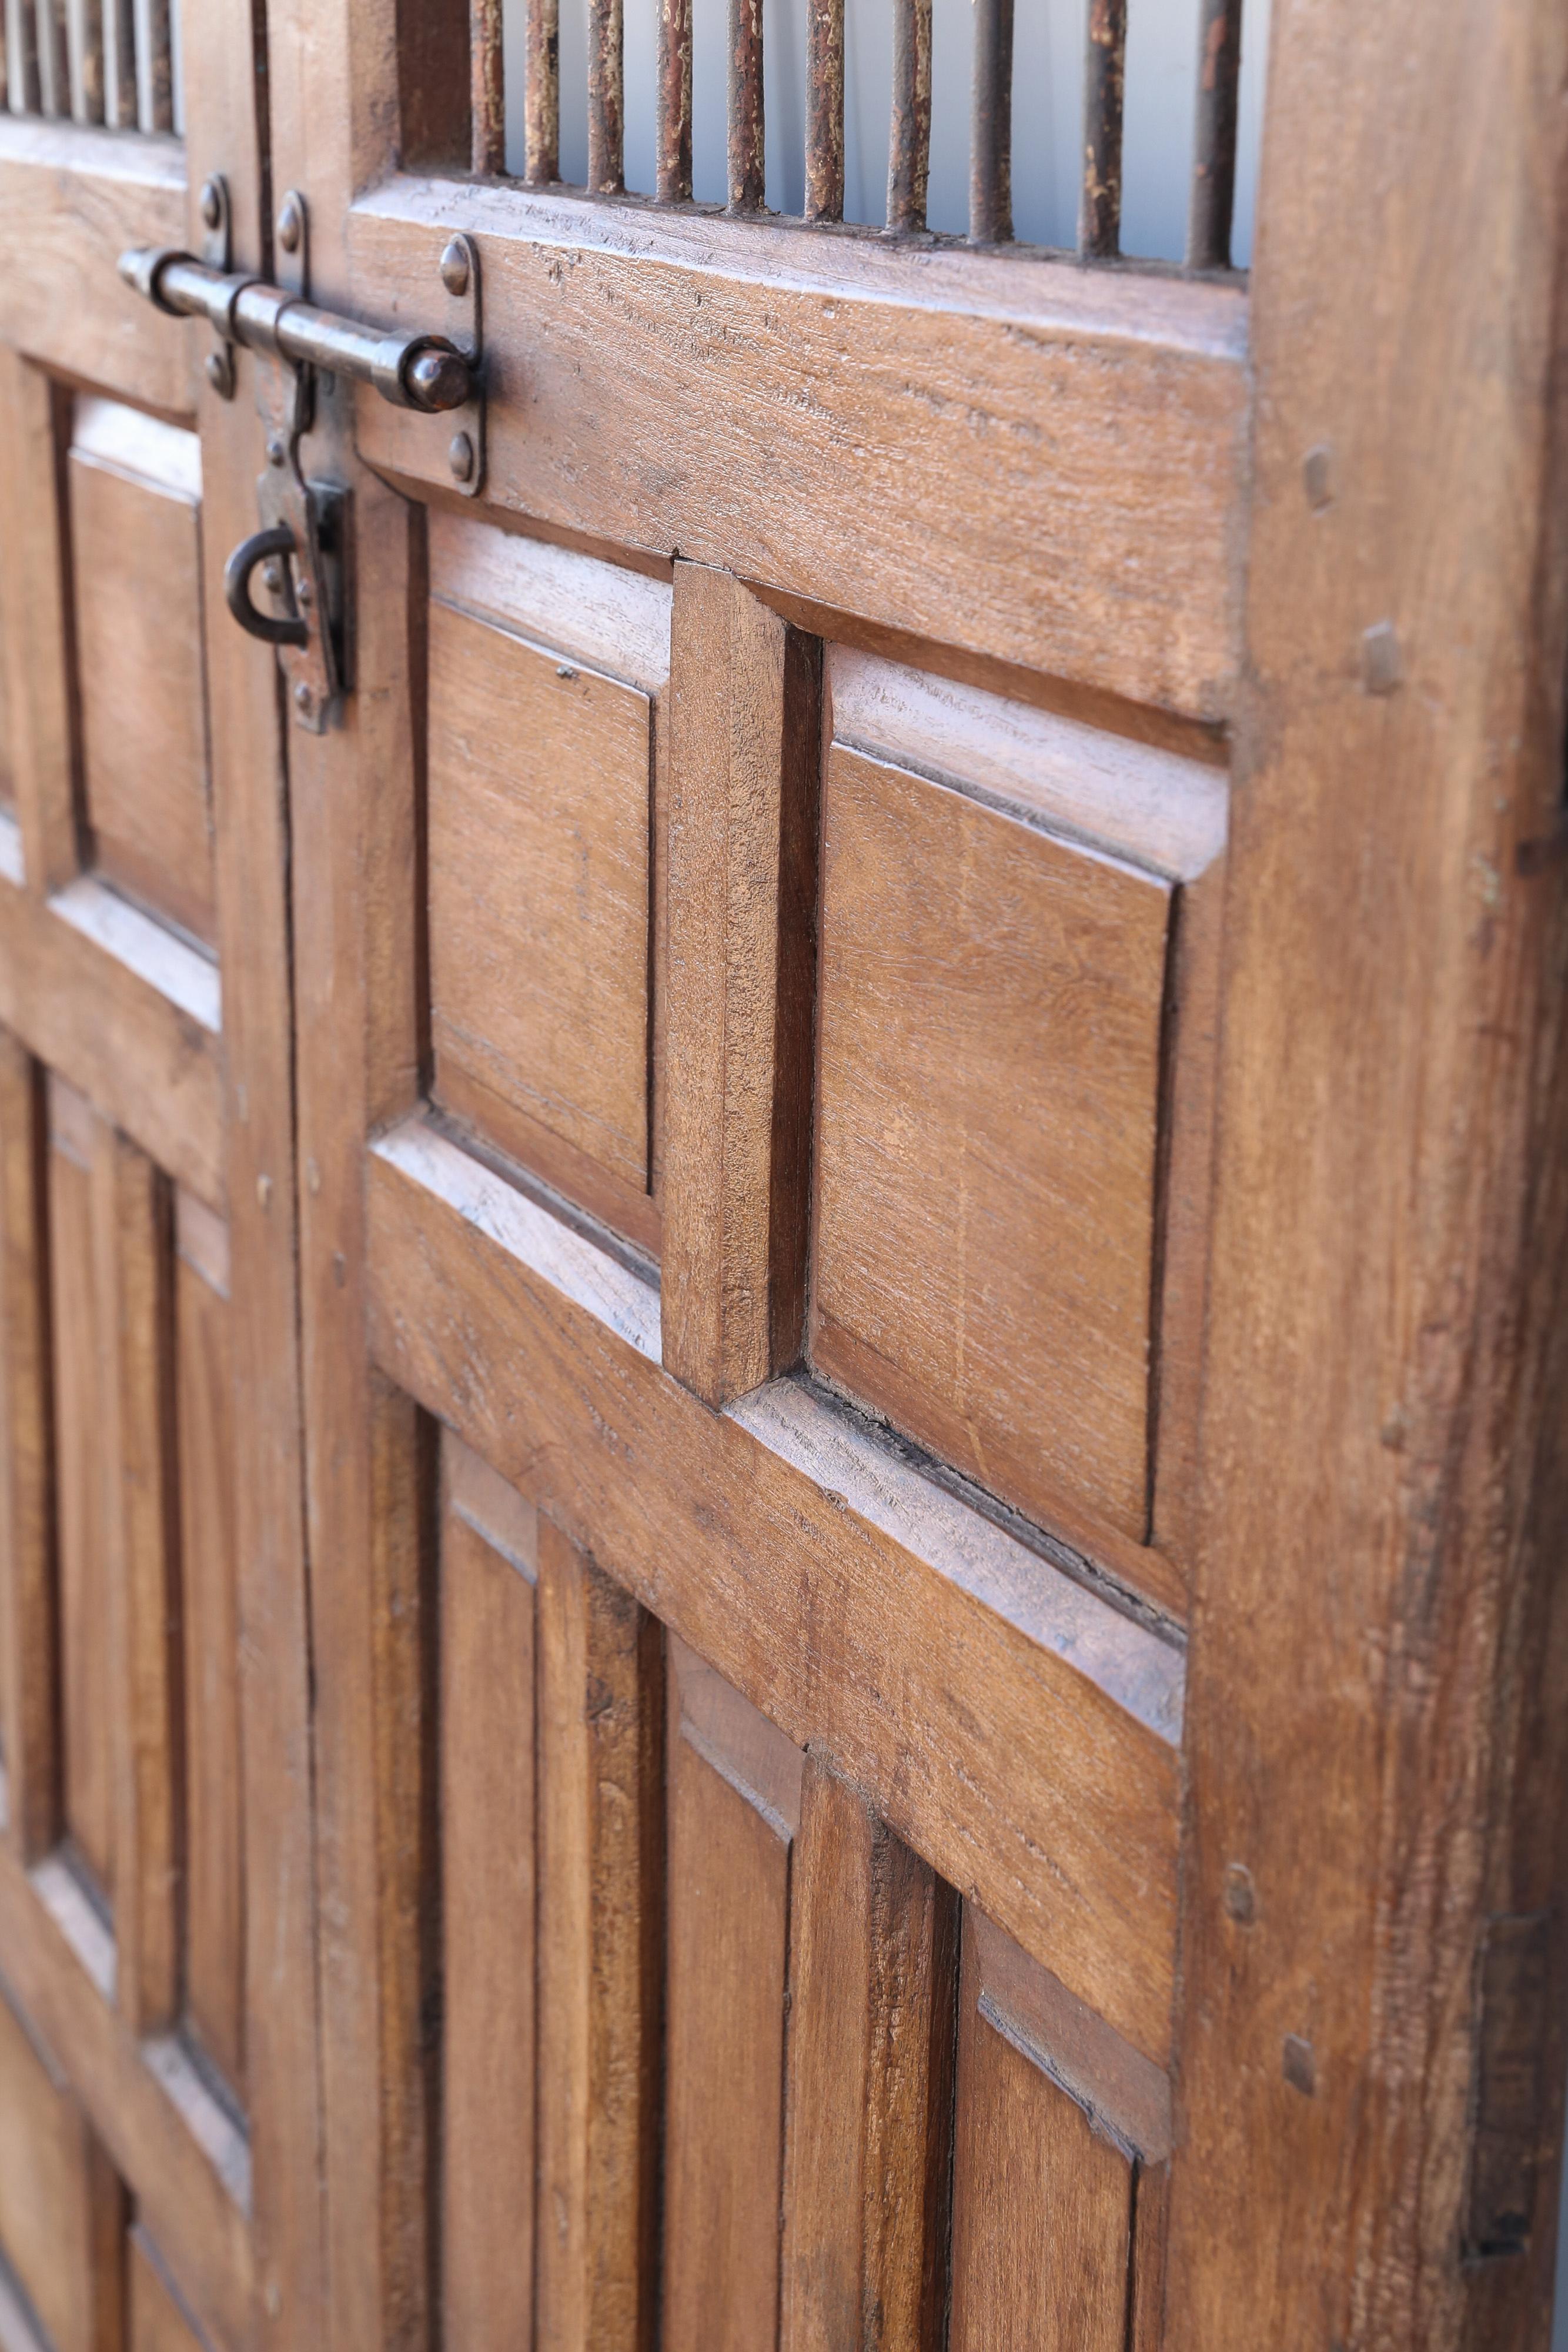 Anglo Raj 1820s Solid Teak Wood Side Entry Door of a Feudal Landlord's Court Yard Home For Sale